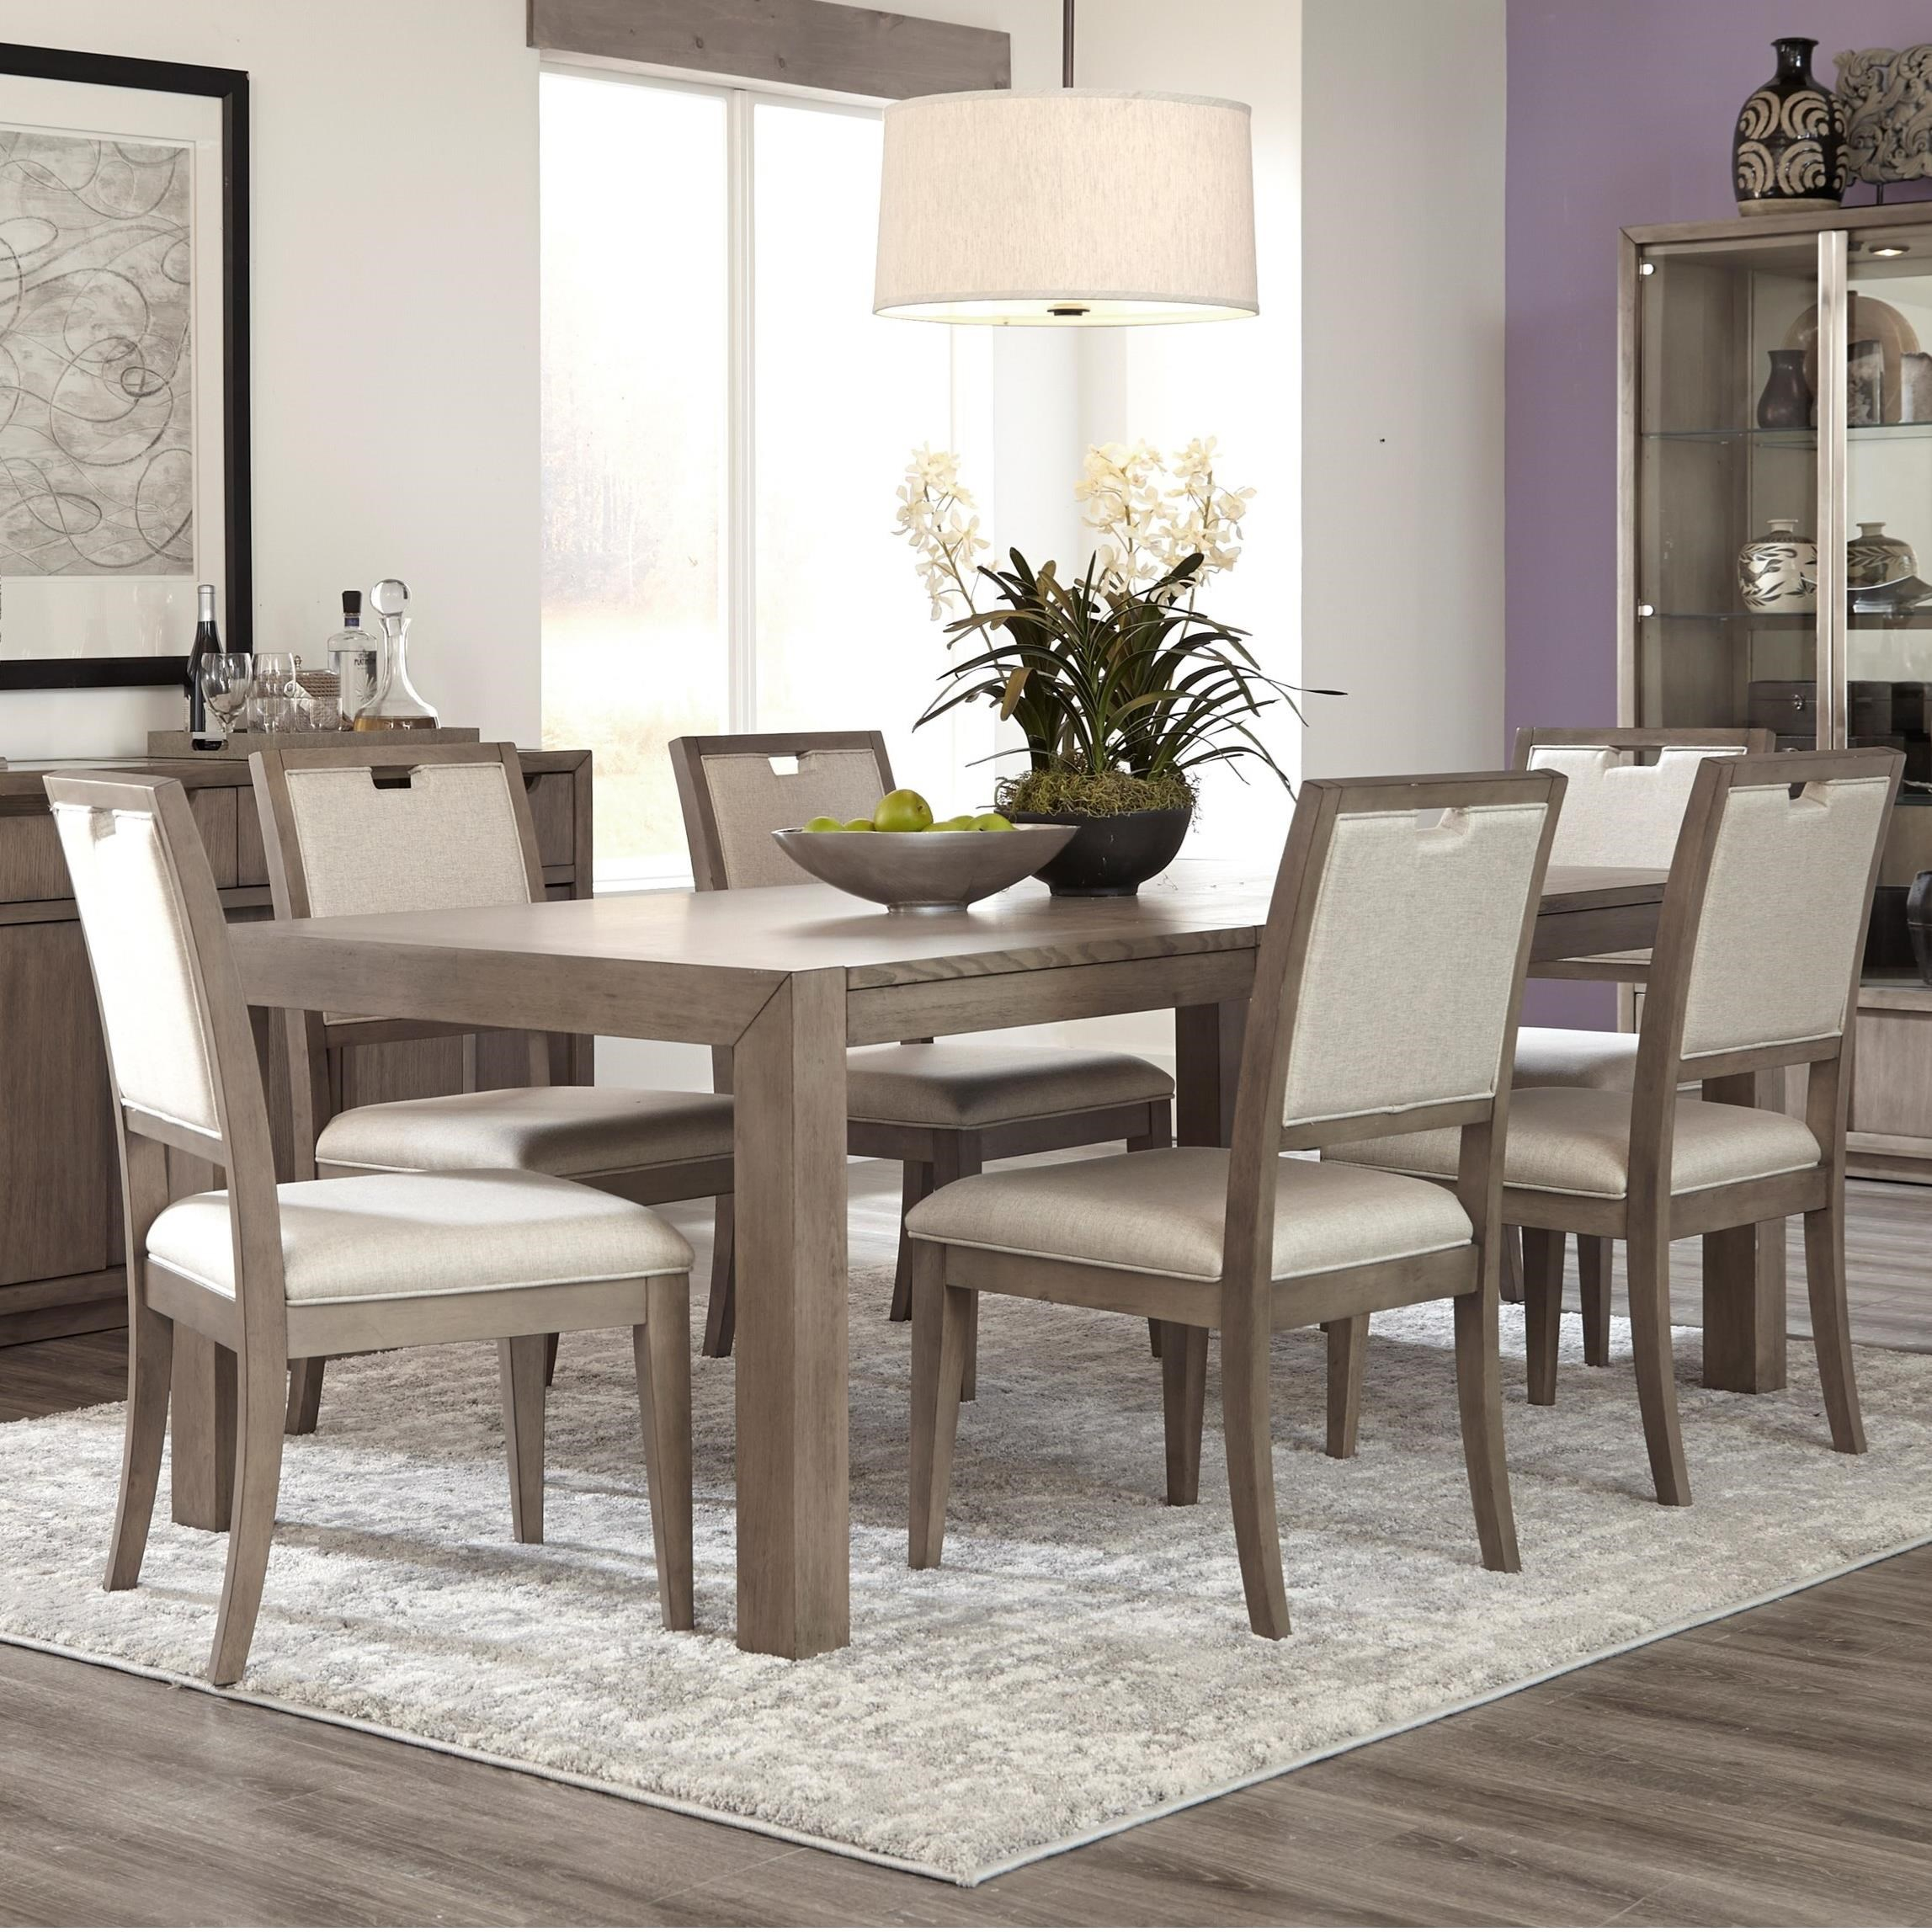 Klaussner International Melbourne Seven Piece Dining Set in dimensions 2295 X 2295